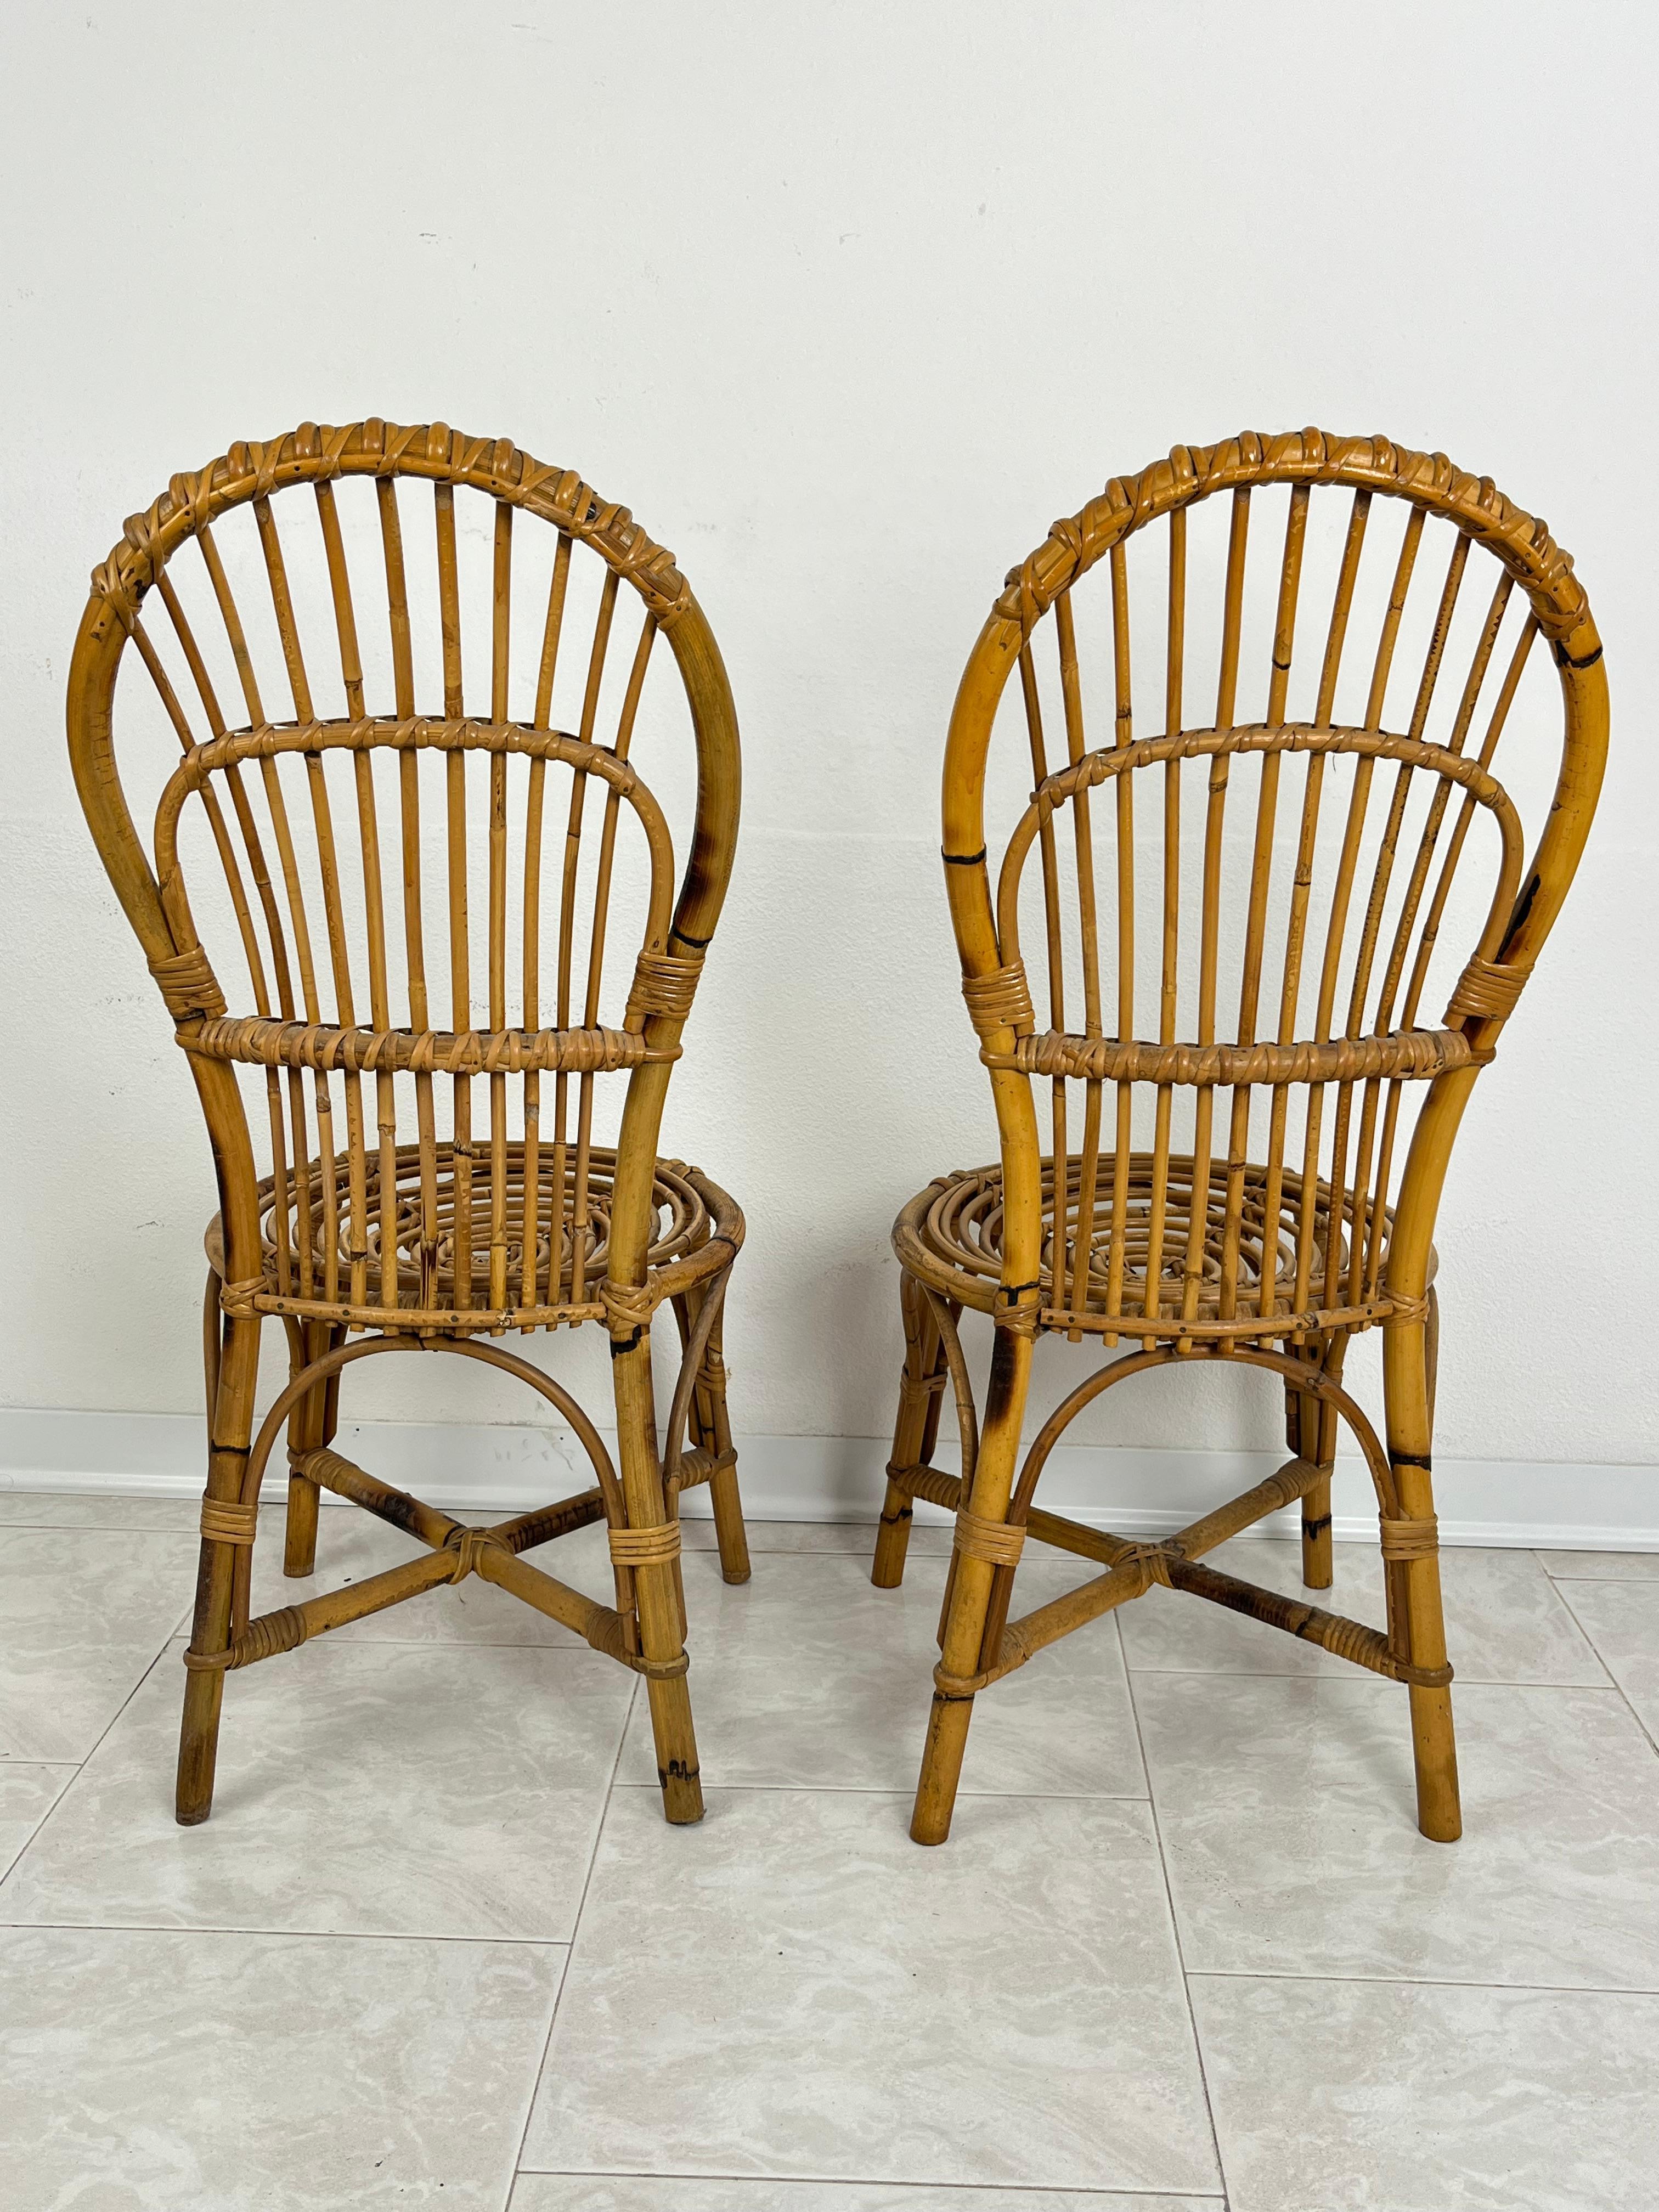 Set of 2 Small Mid-Century Bamboo Chairs, Italian Design 1950s In Good Condition For Sale In Palermo, IT